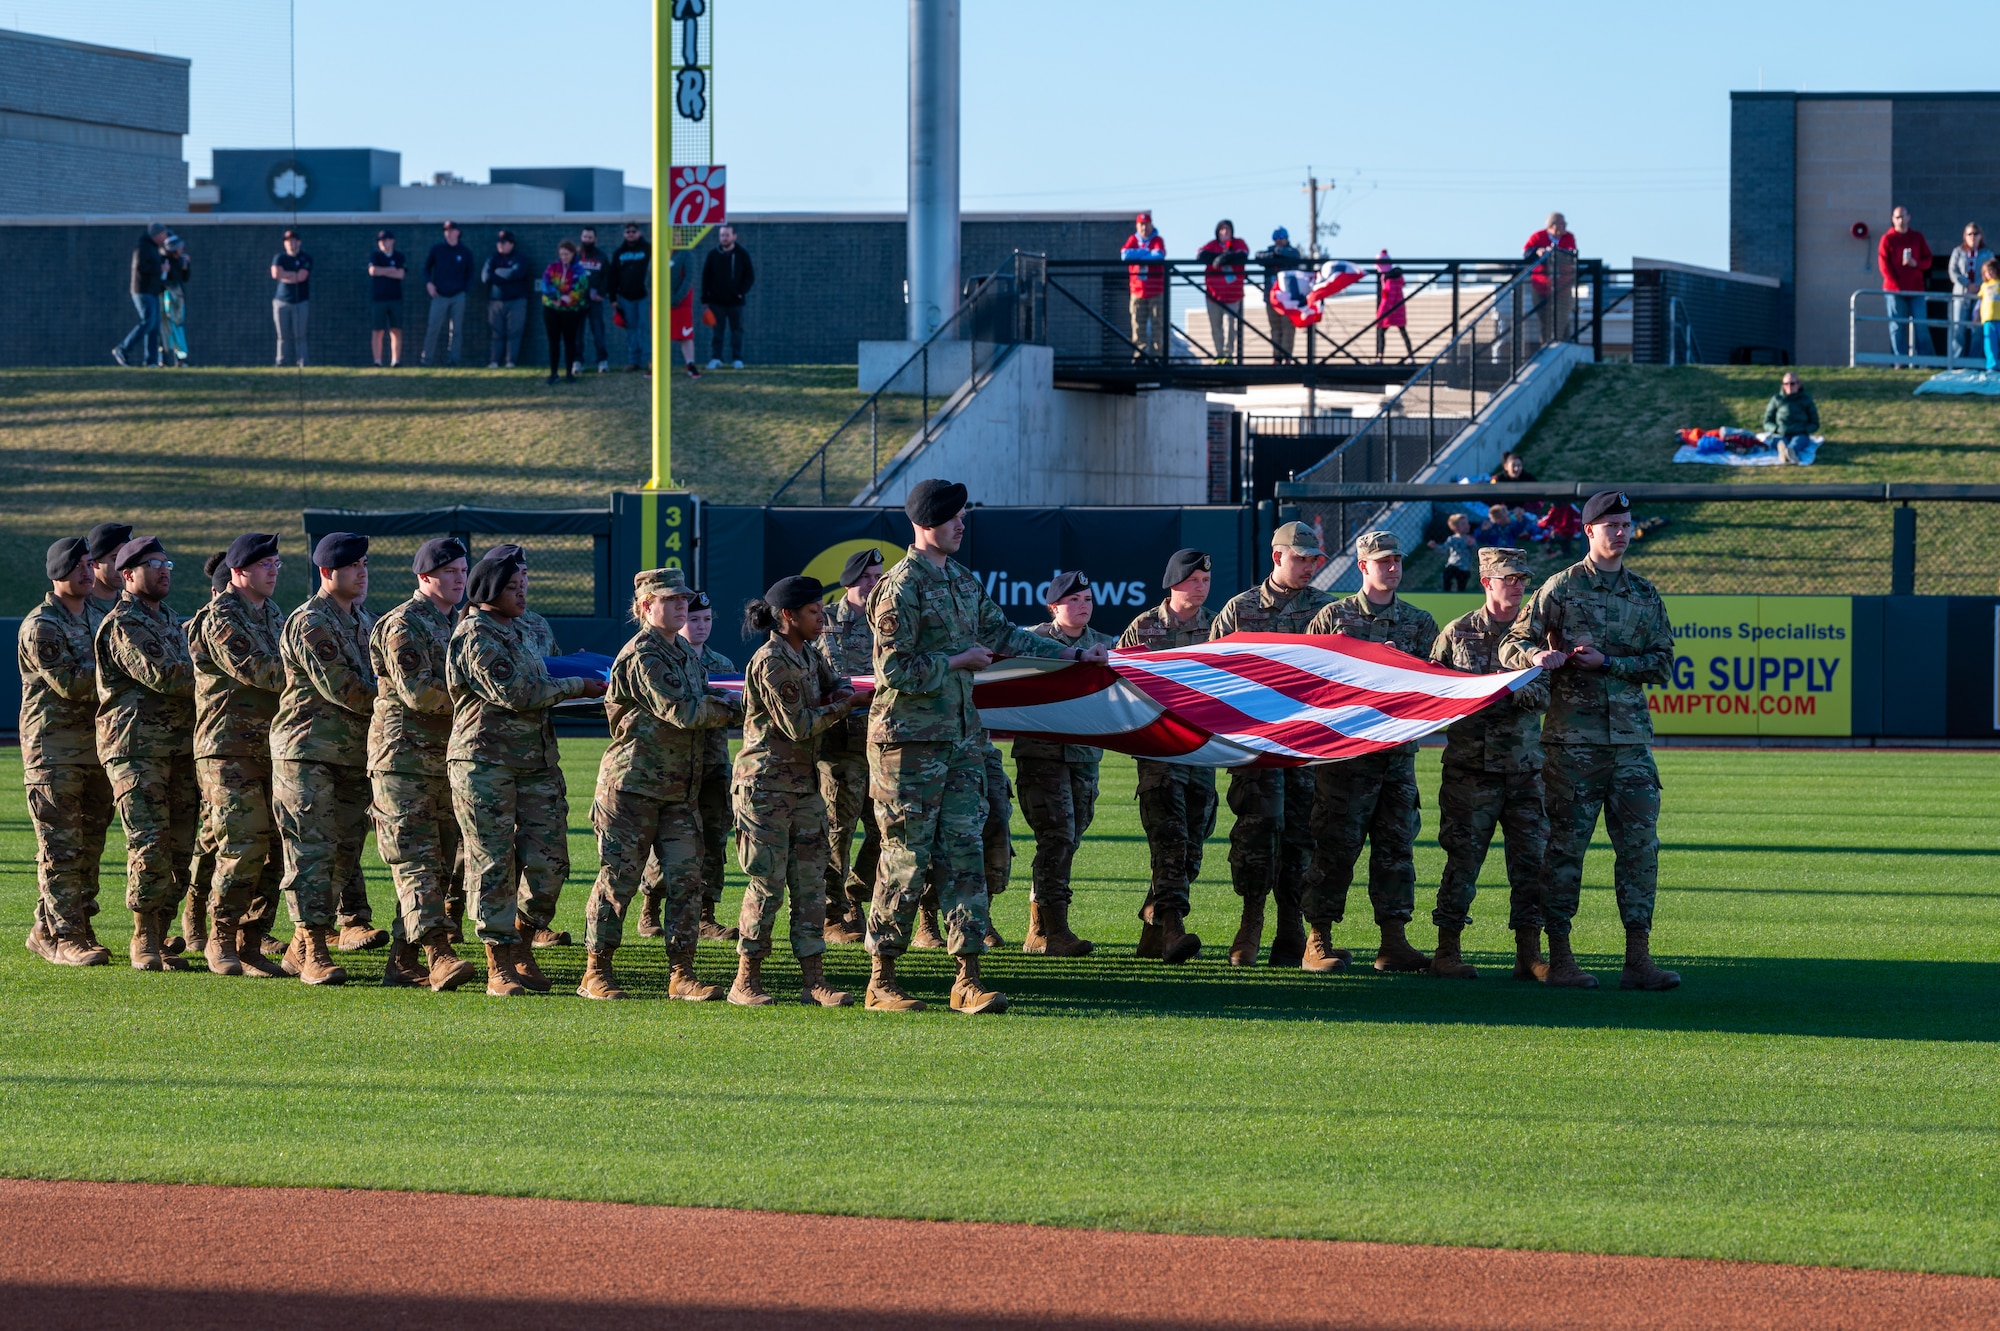 Airmen from the 22nd Air Refueling Wing, McConnell Air Force Base, Kansas, present an American flag for the national anthem April 8, 2022, at Riverfront Stadium in Wichita, Kansas. McConnell’s